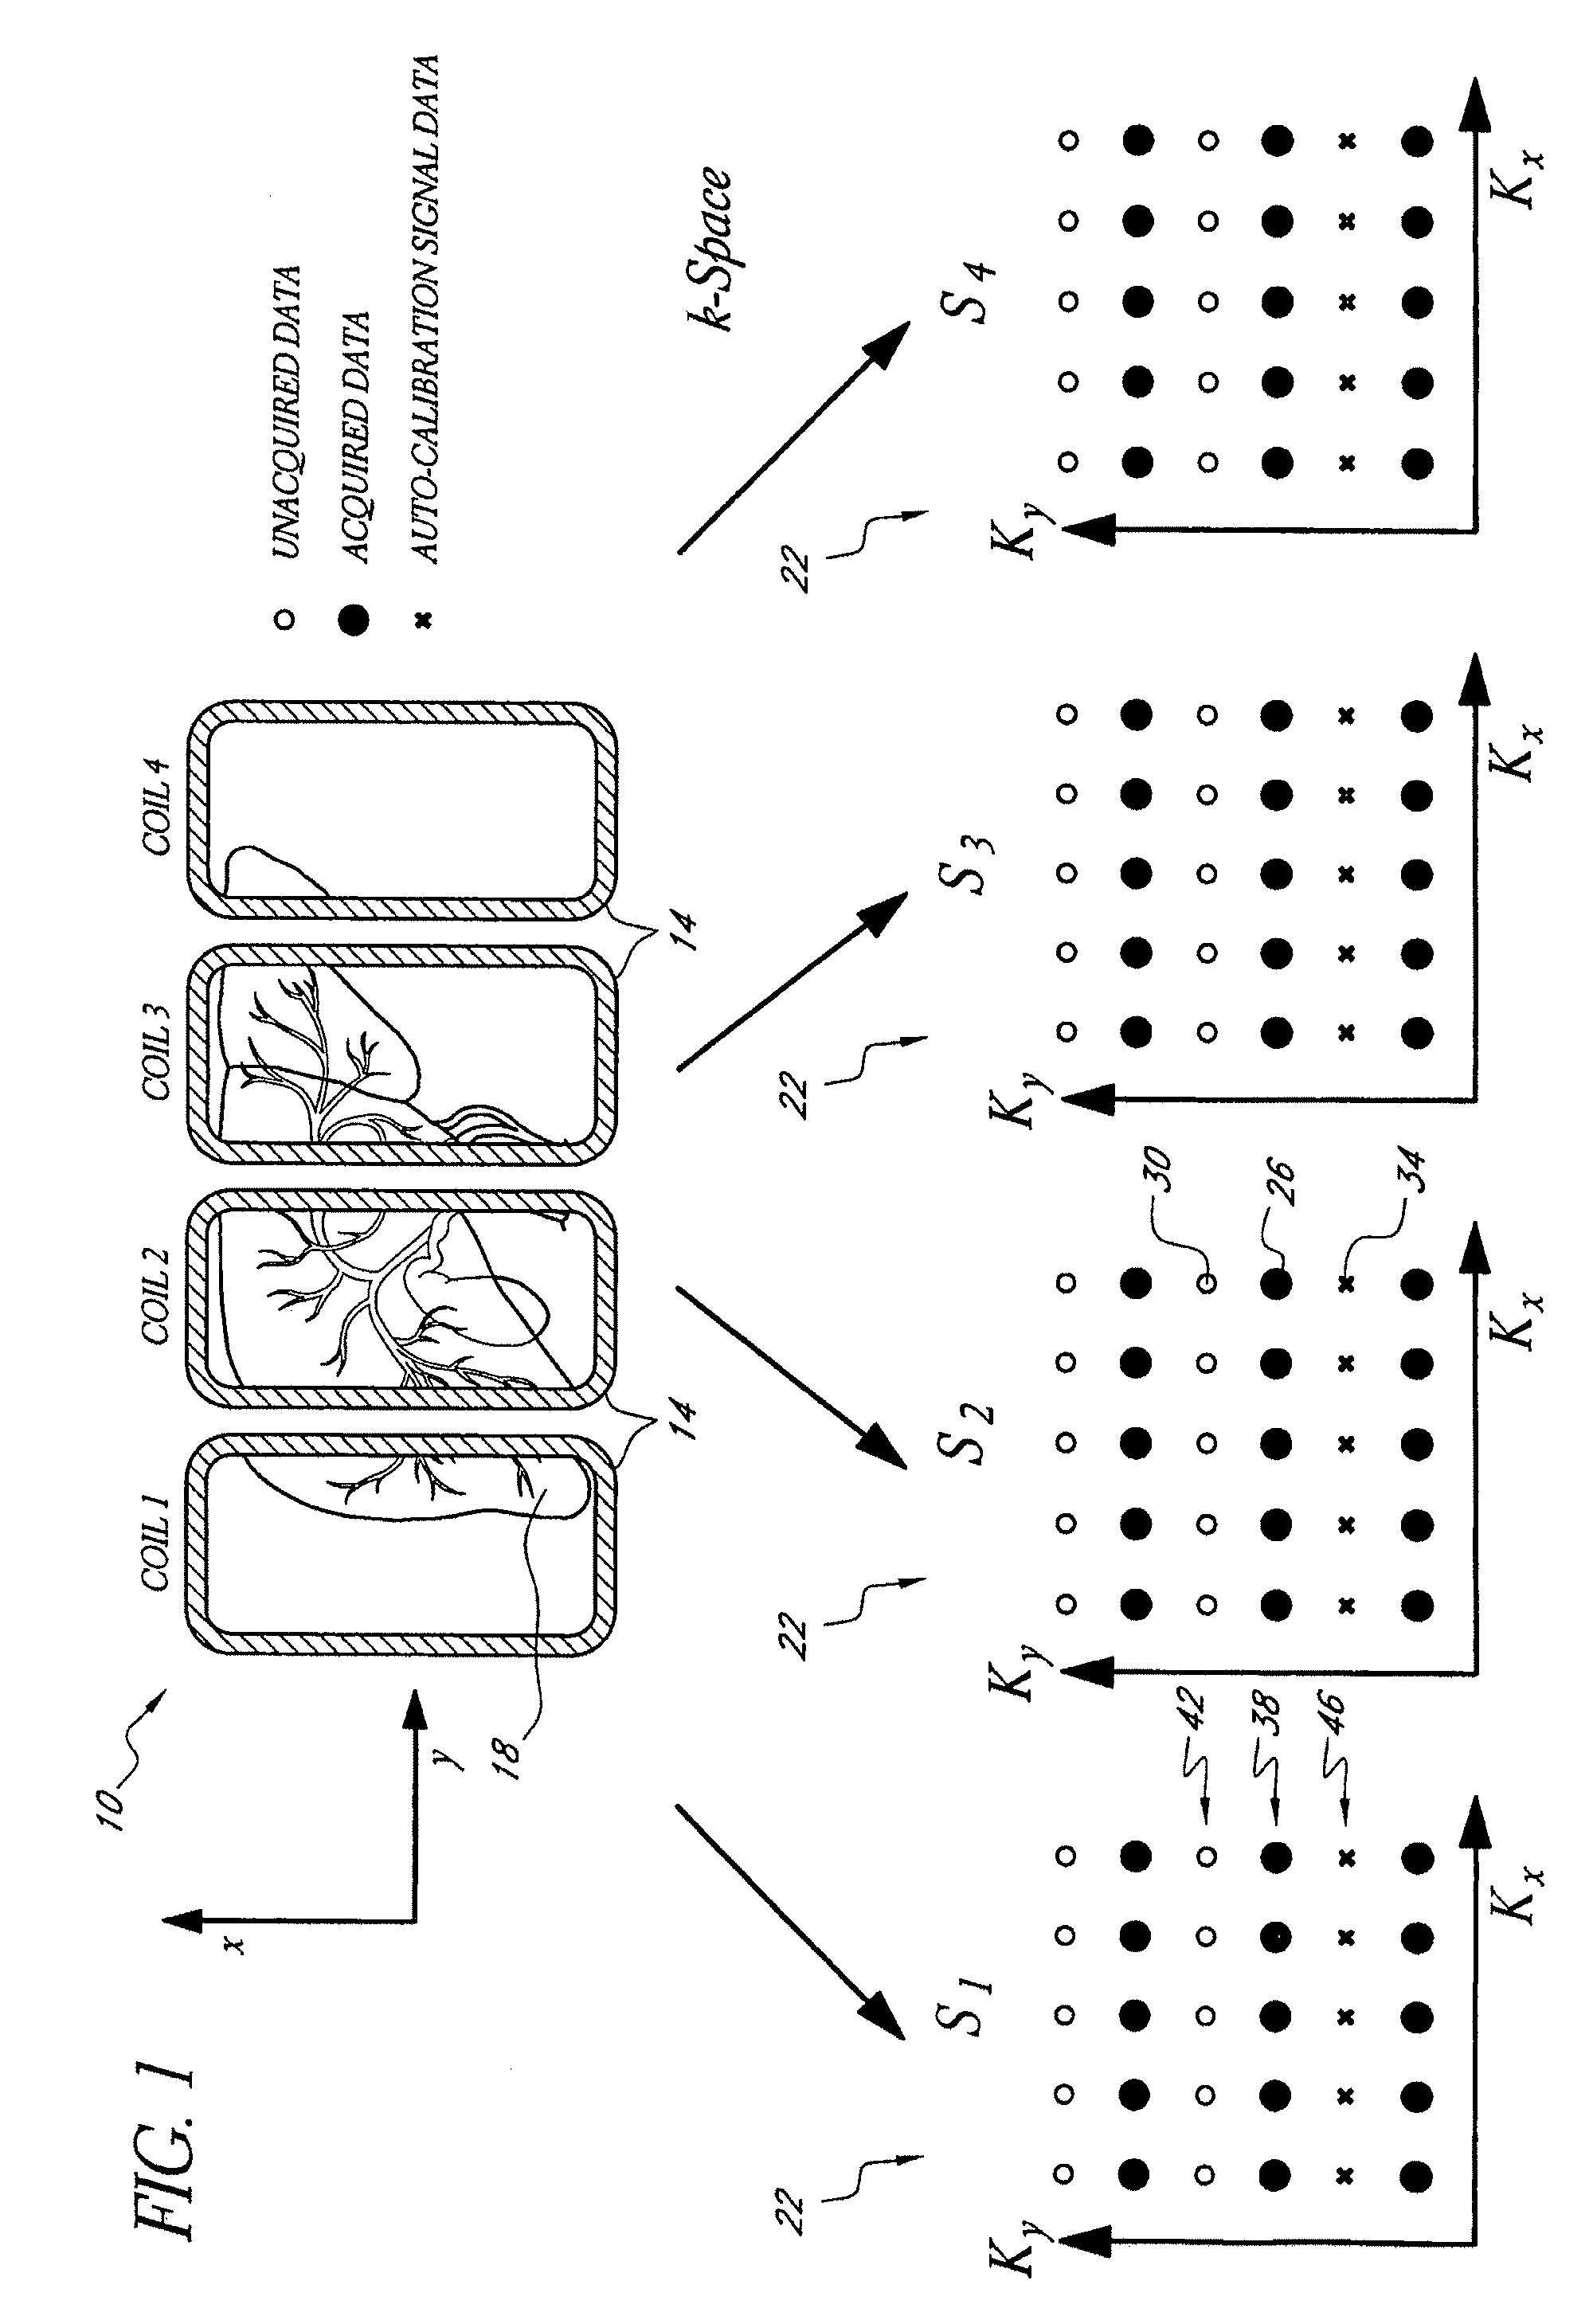 Systems and methods for image reconstruction of sensitivity encoded MRI data